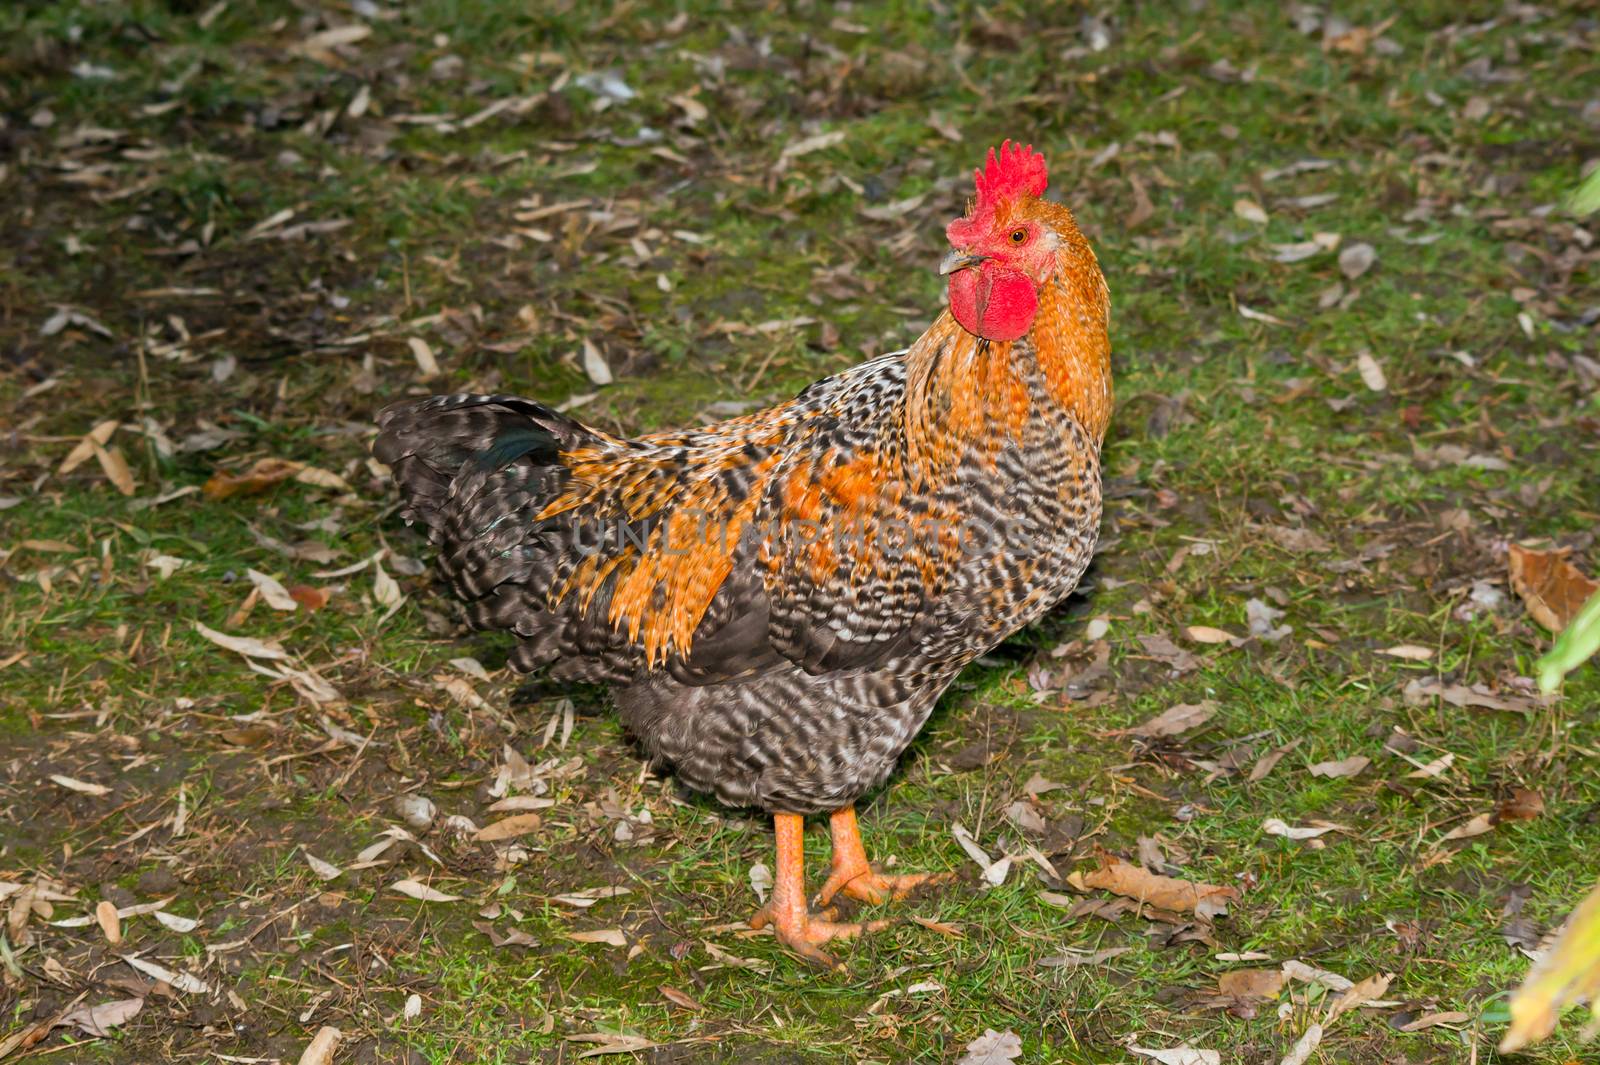 Speckled rooster. by dadalia